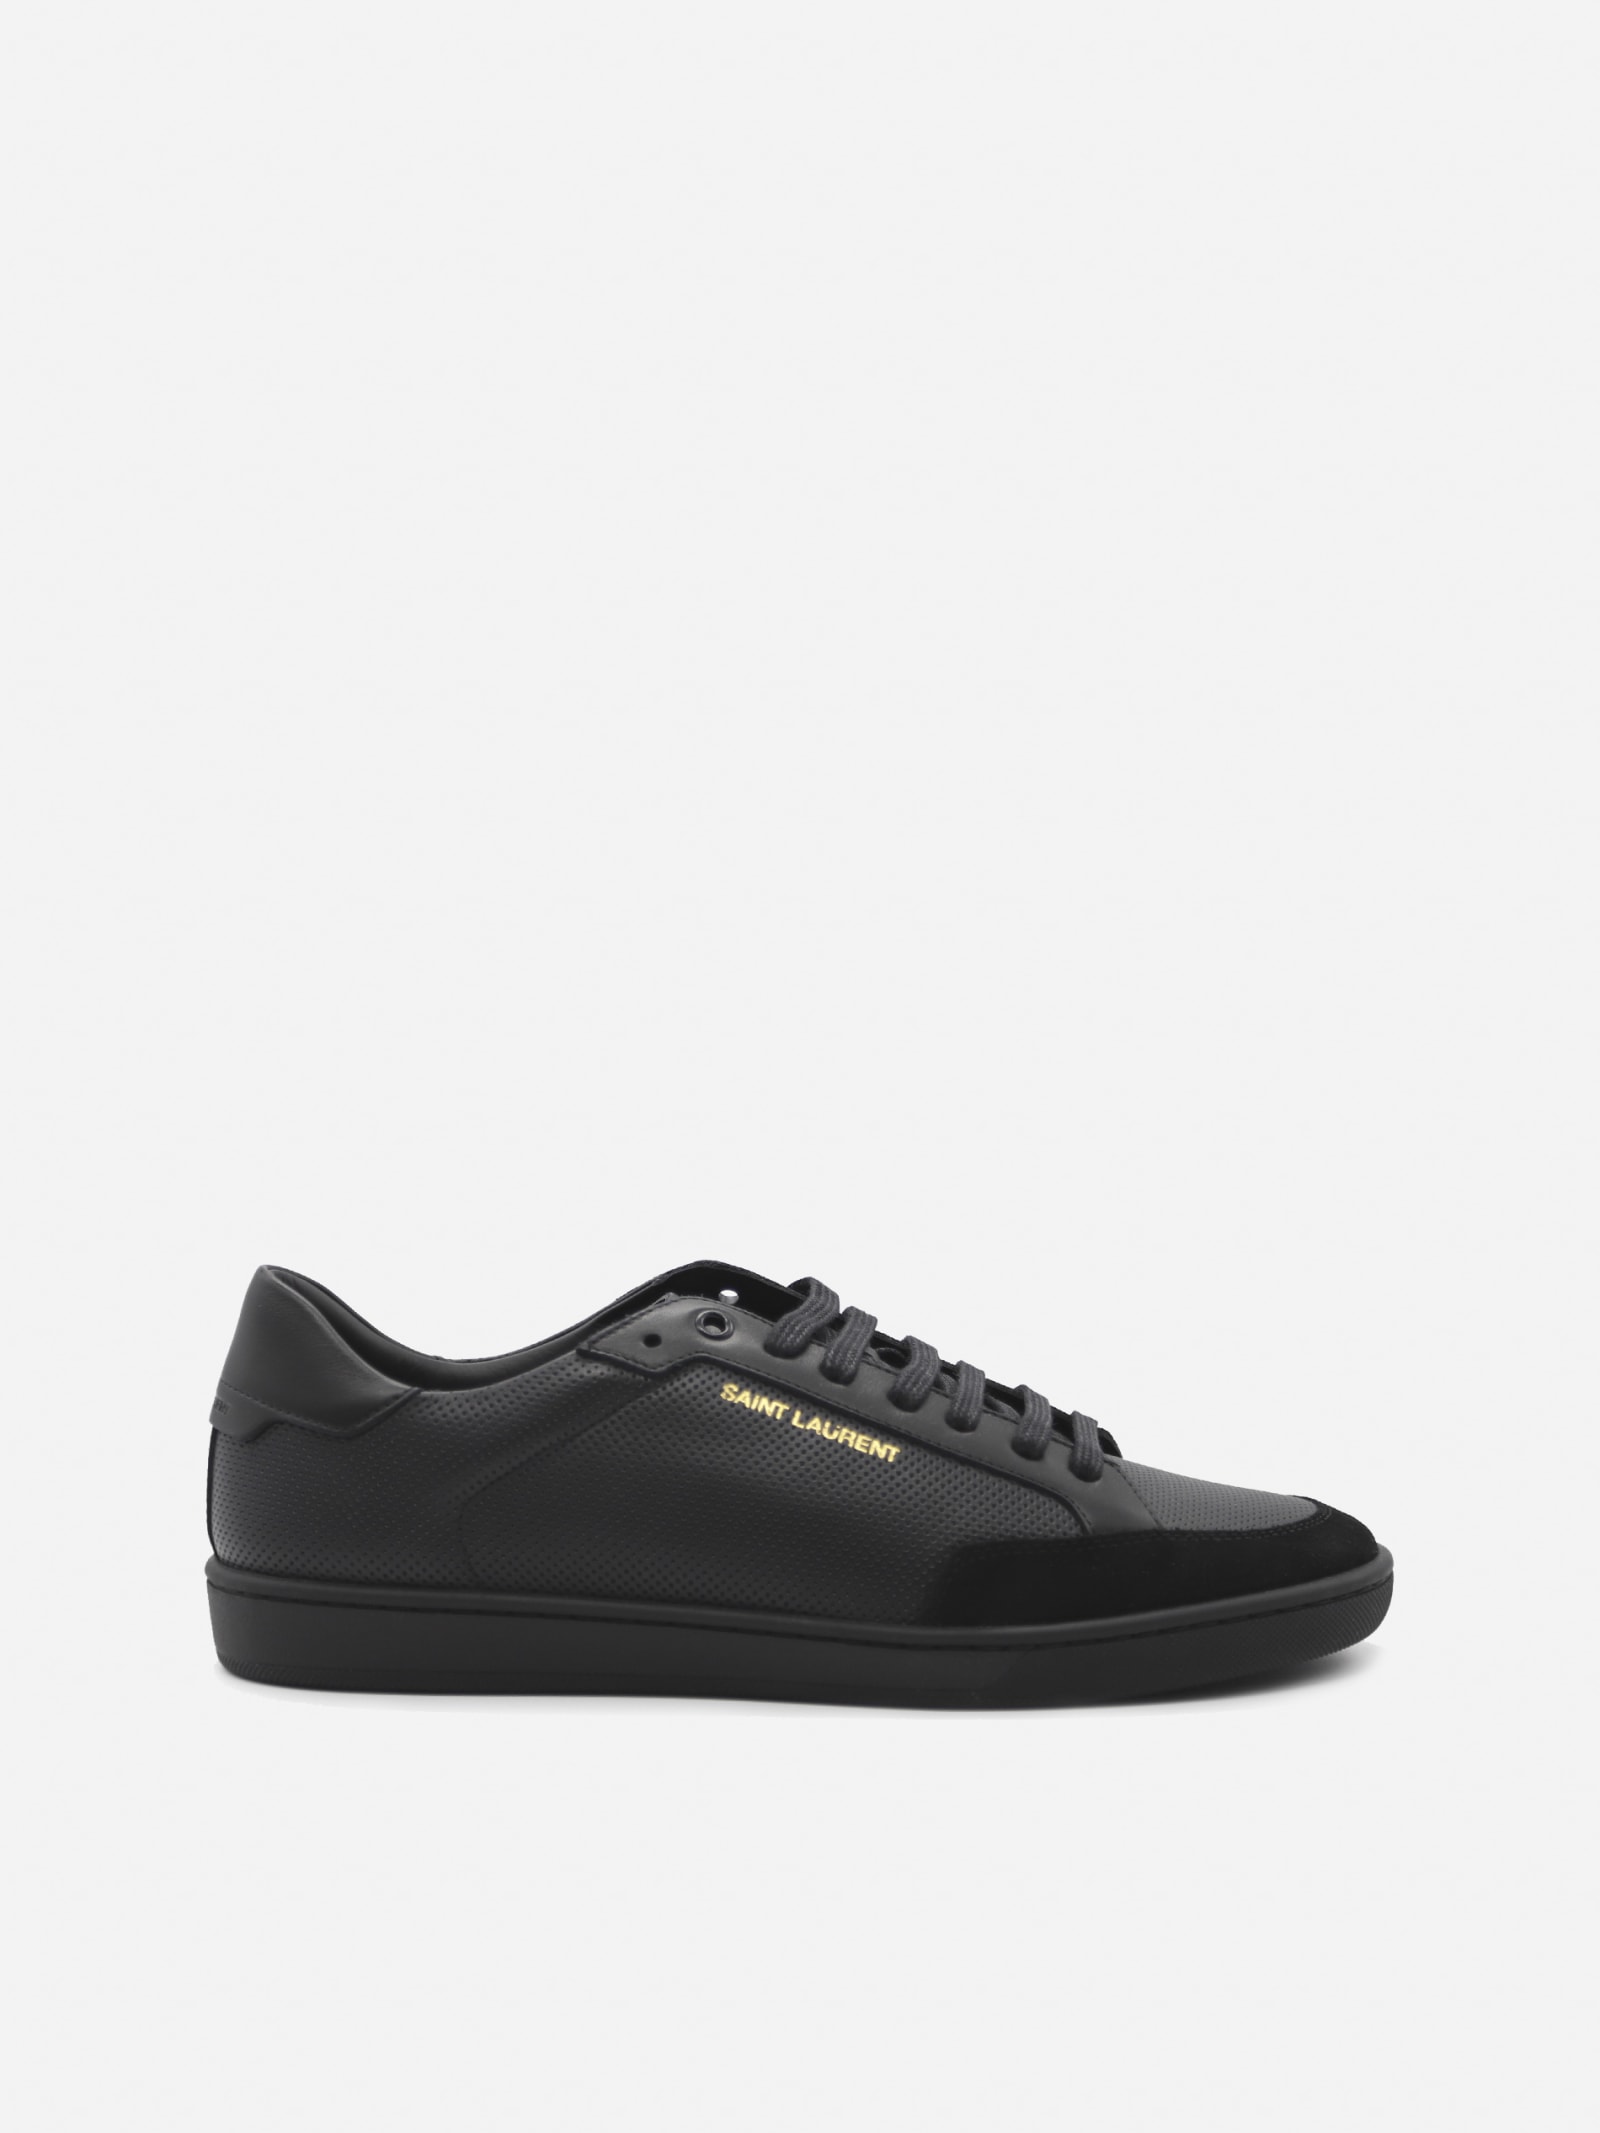 Saint Laurent Court Classic Sl / 10 Sneakers In Leather With Suede Inserts